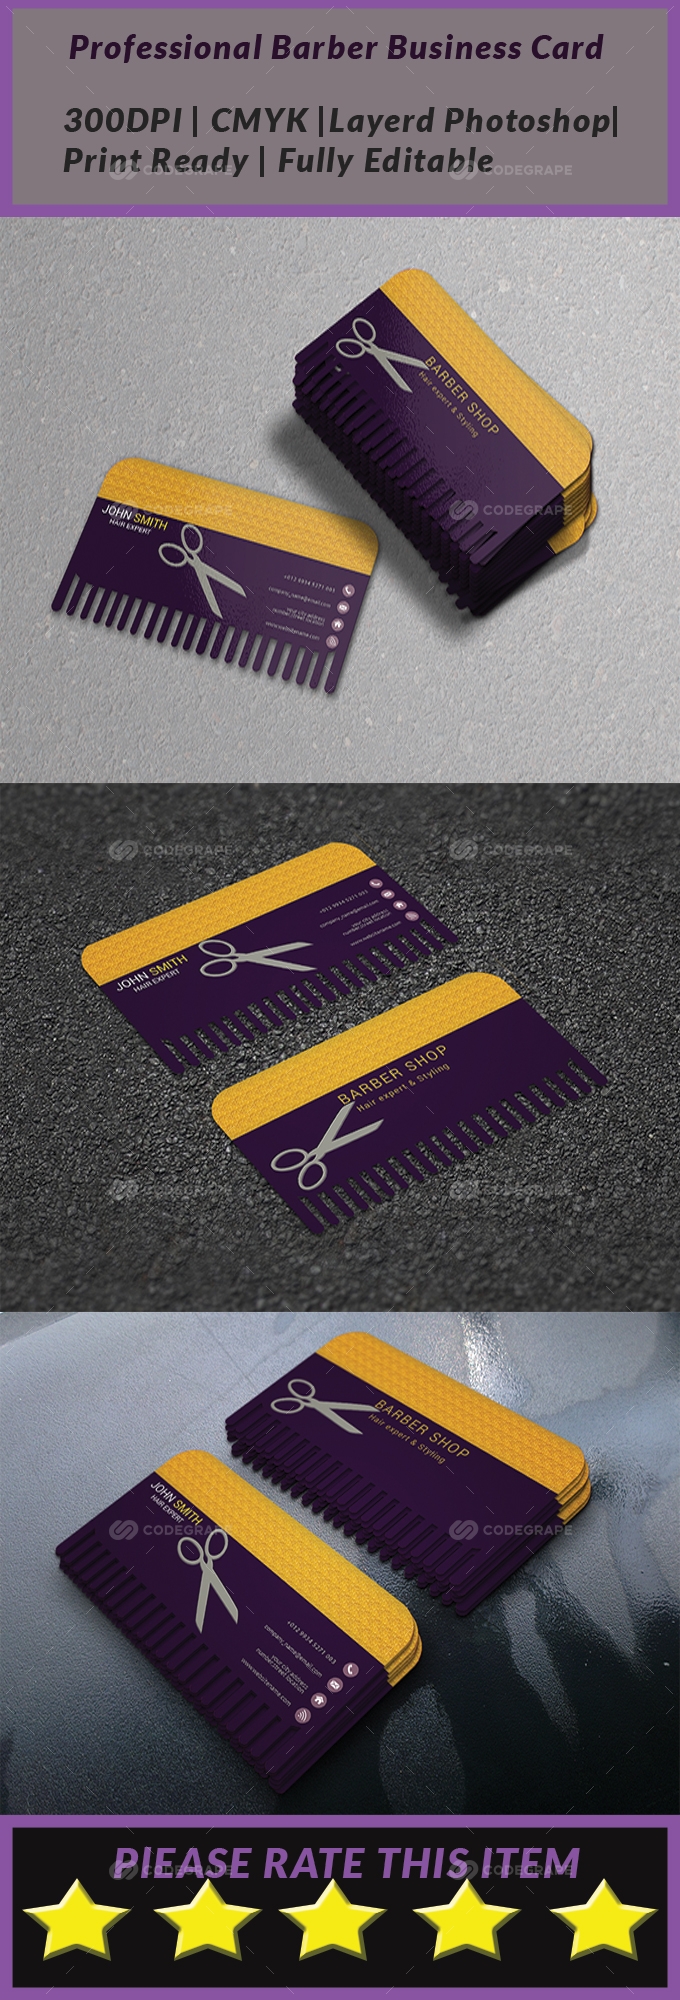 Professional Barber Business Card